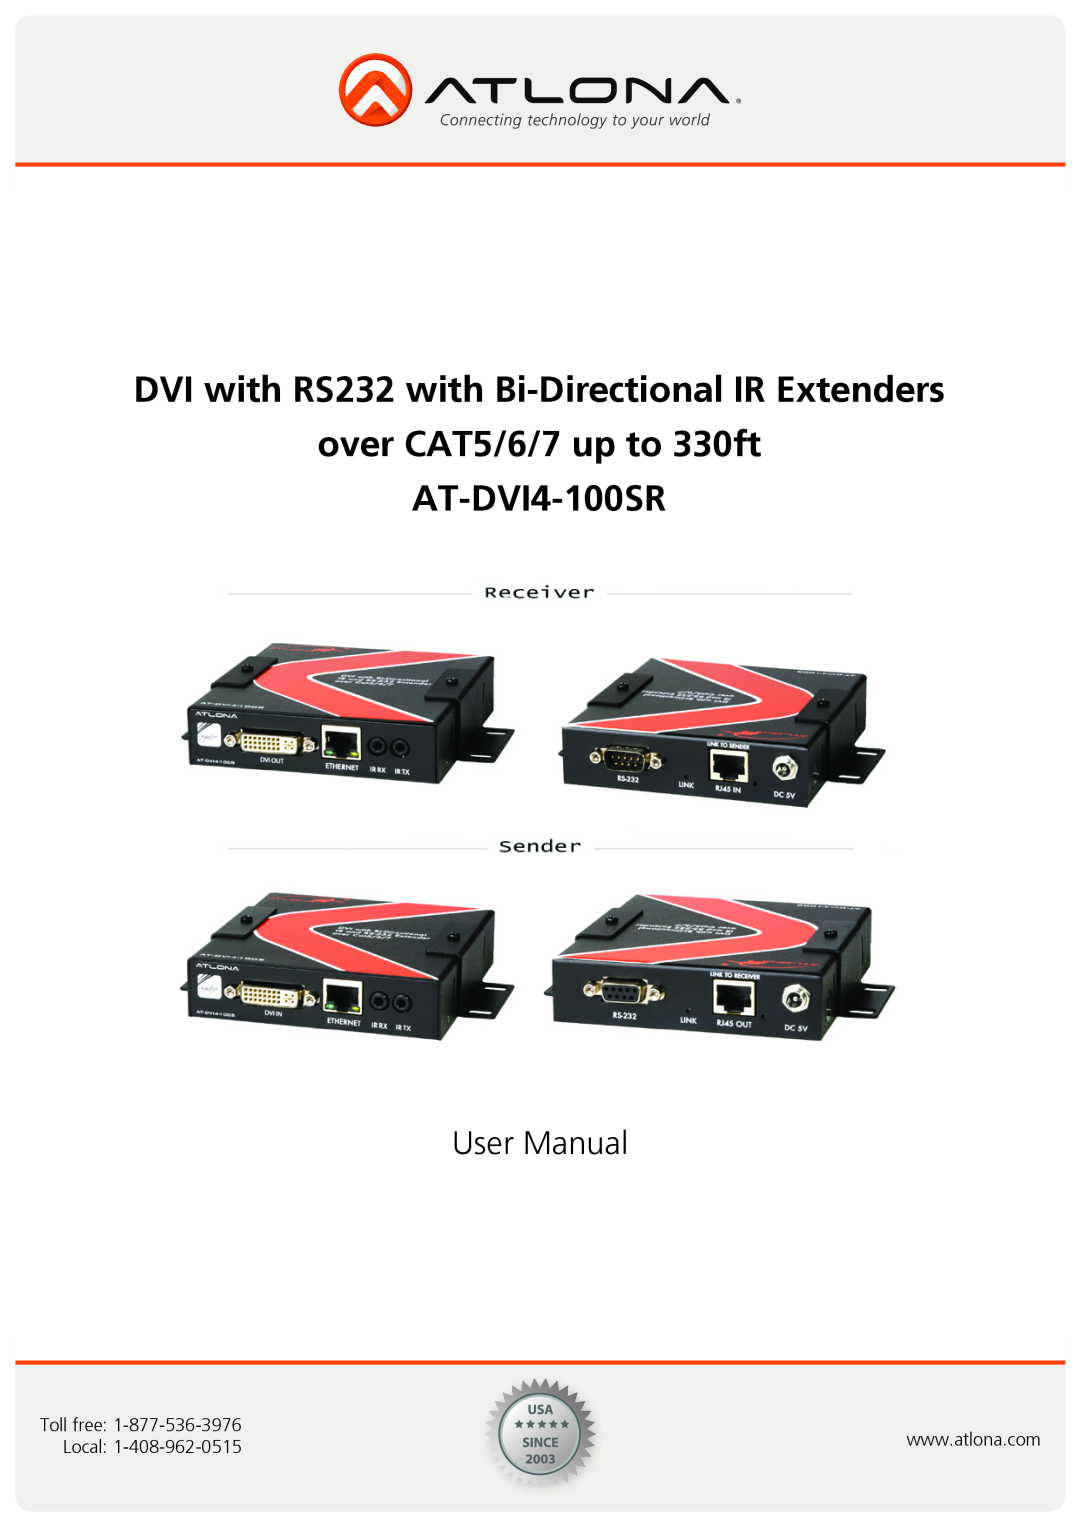 Atlona user manual DVI with RS232 with Bi-Directional IR Extenders, over CAT5/6/7 up to 330ft AT-DVI4-100SR, Toll free 